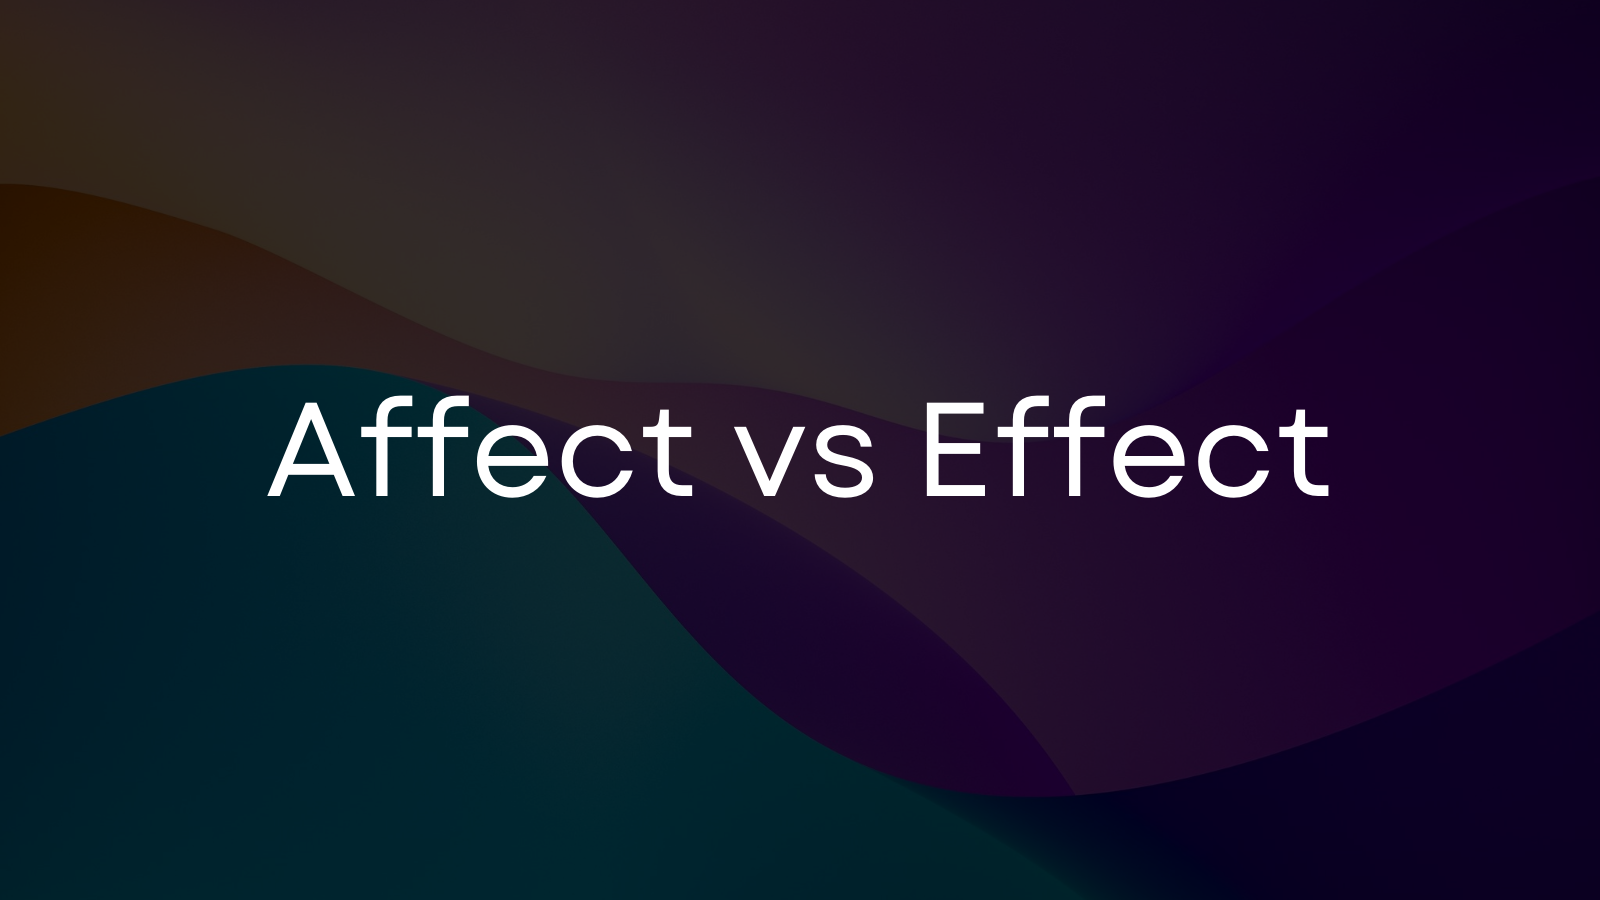 Affect vs. Effect: Quick tips to know the difference